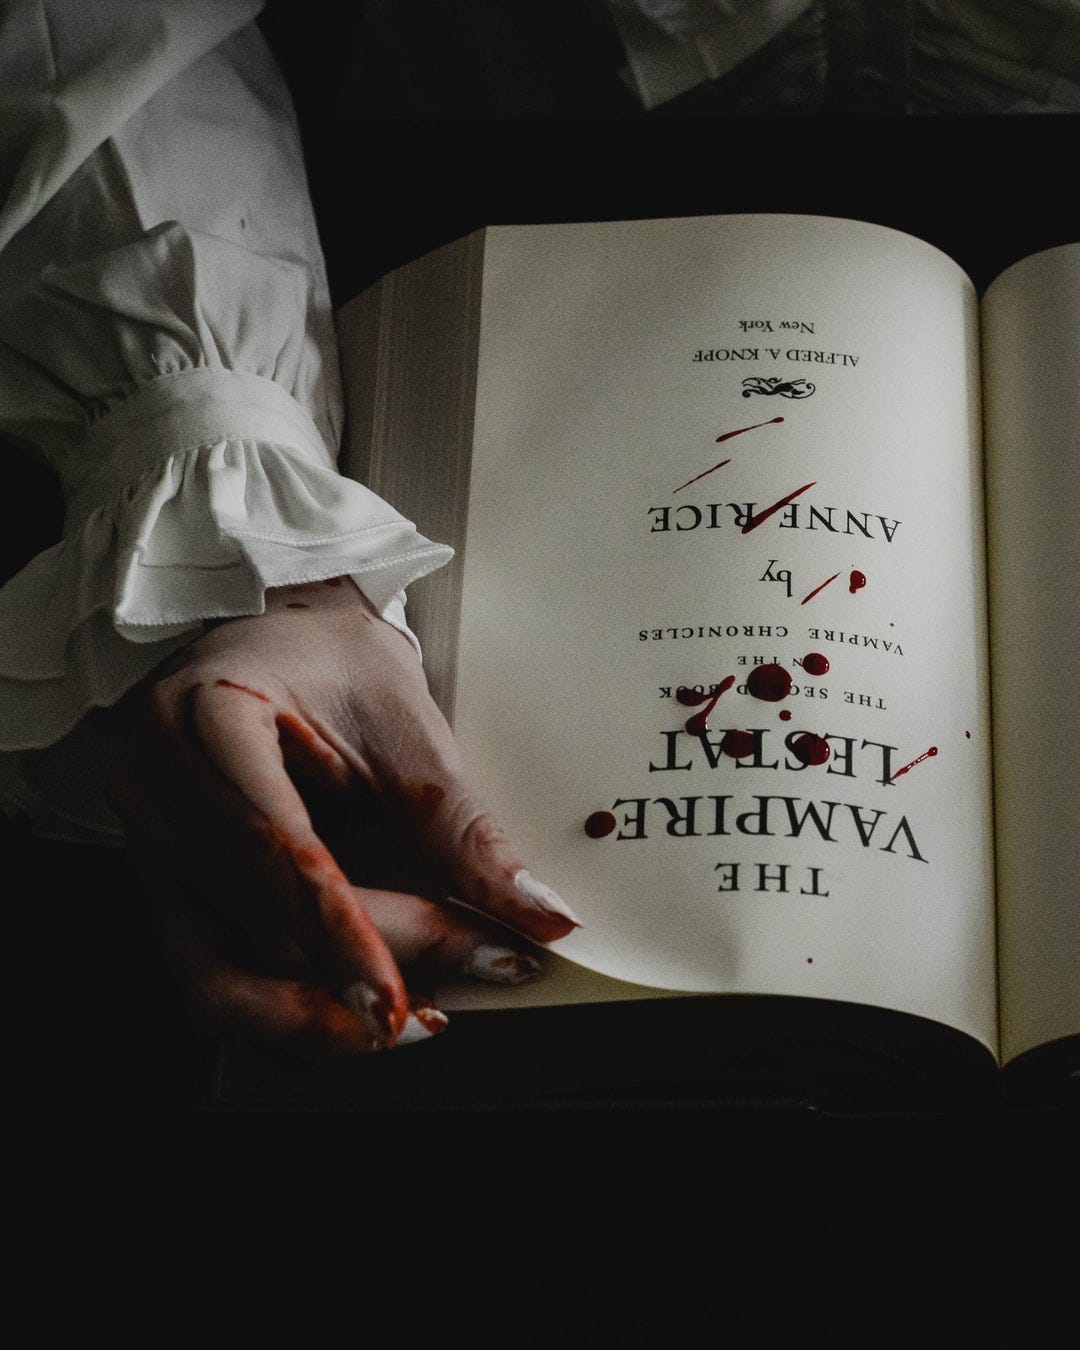 the vampire lestat book by anne rice opened with blood drops and streaks on the page, a hand stained in blood at the corner of the page